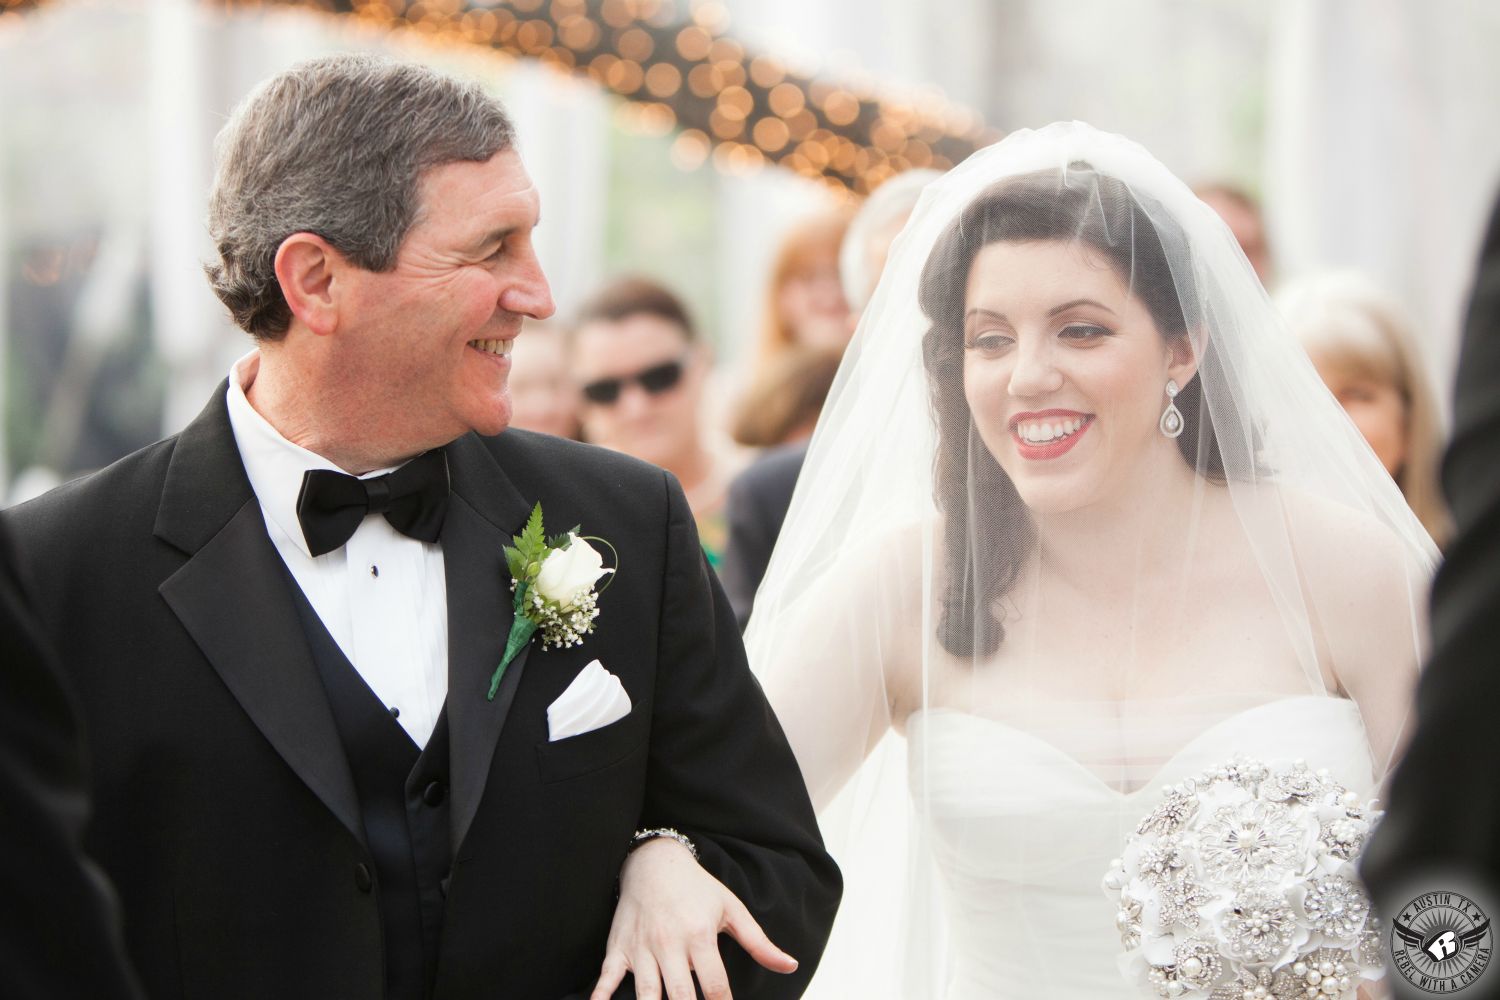 Beautiful brunette bride in blusher veil is walked down the aisle by her loving father in a black tuxedo with a black bowtie at wedding ceremony in the winter tent at the Allan house wedding venue in downtown Austin.